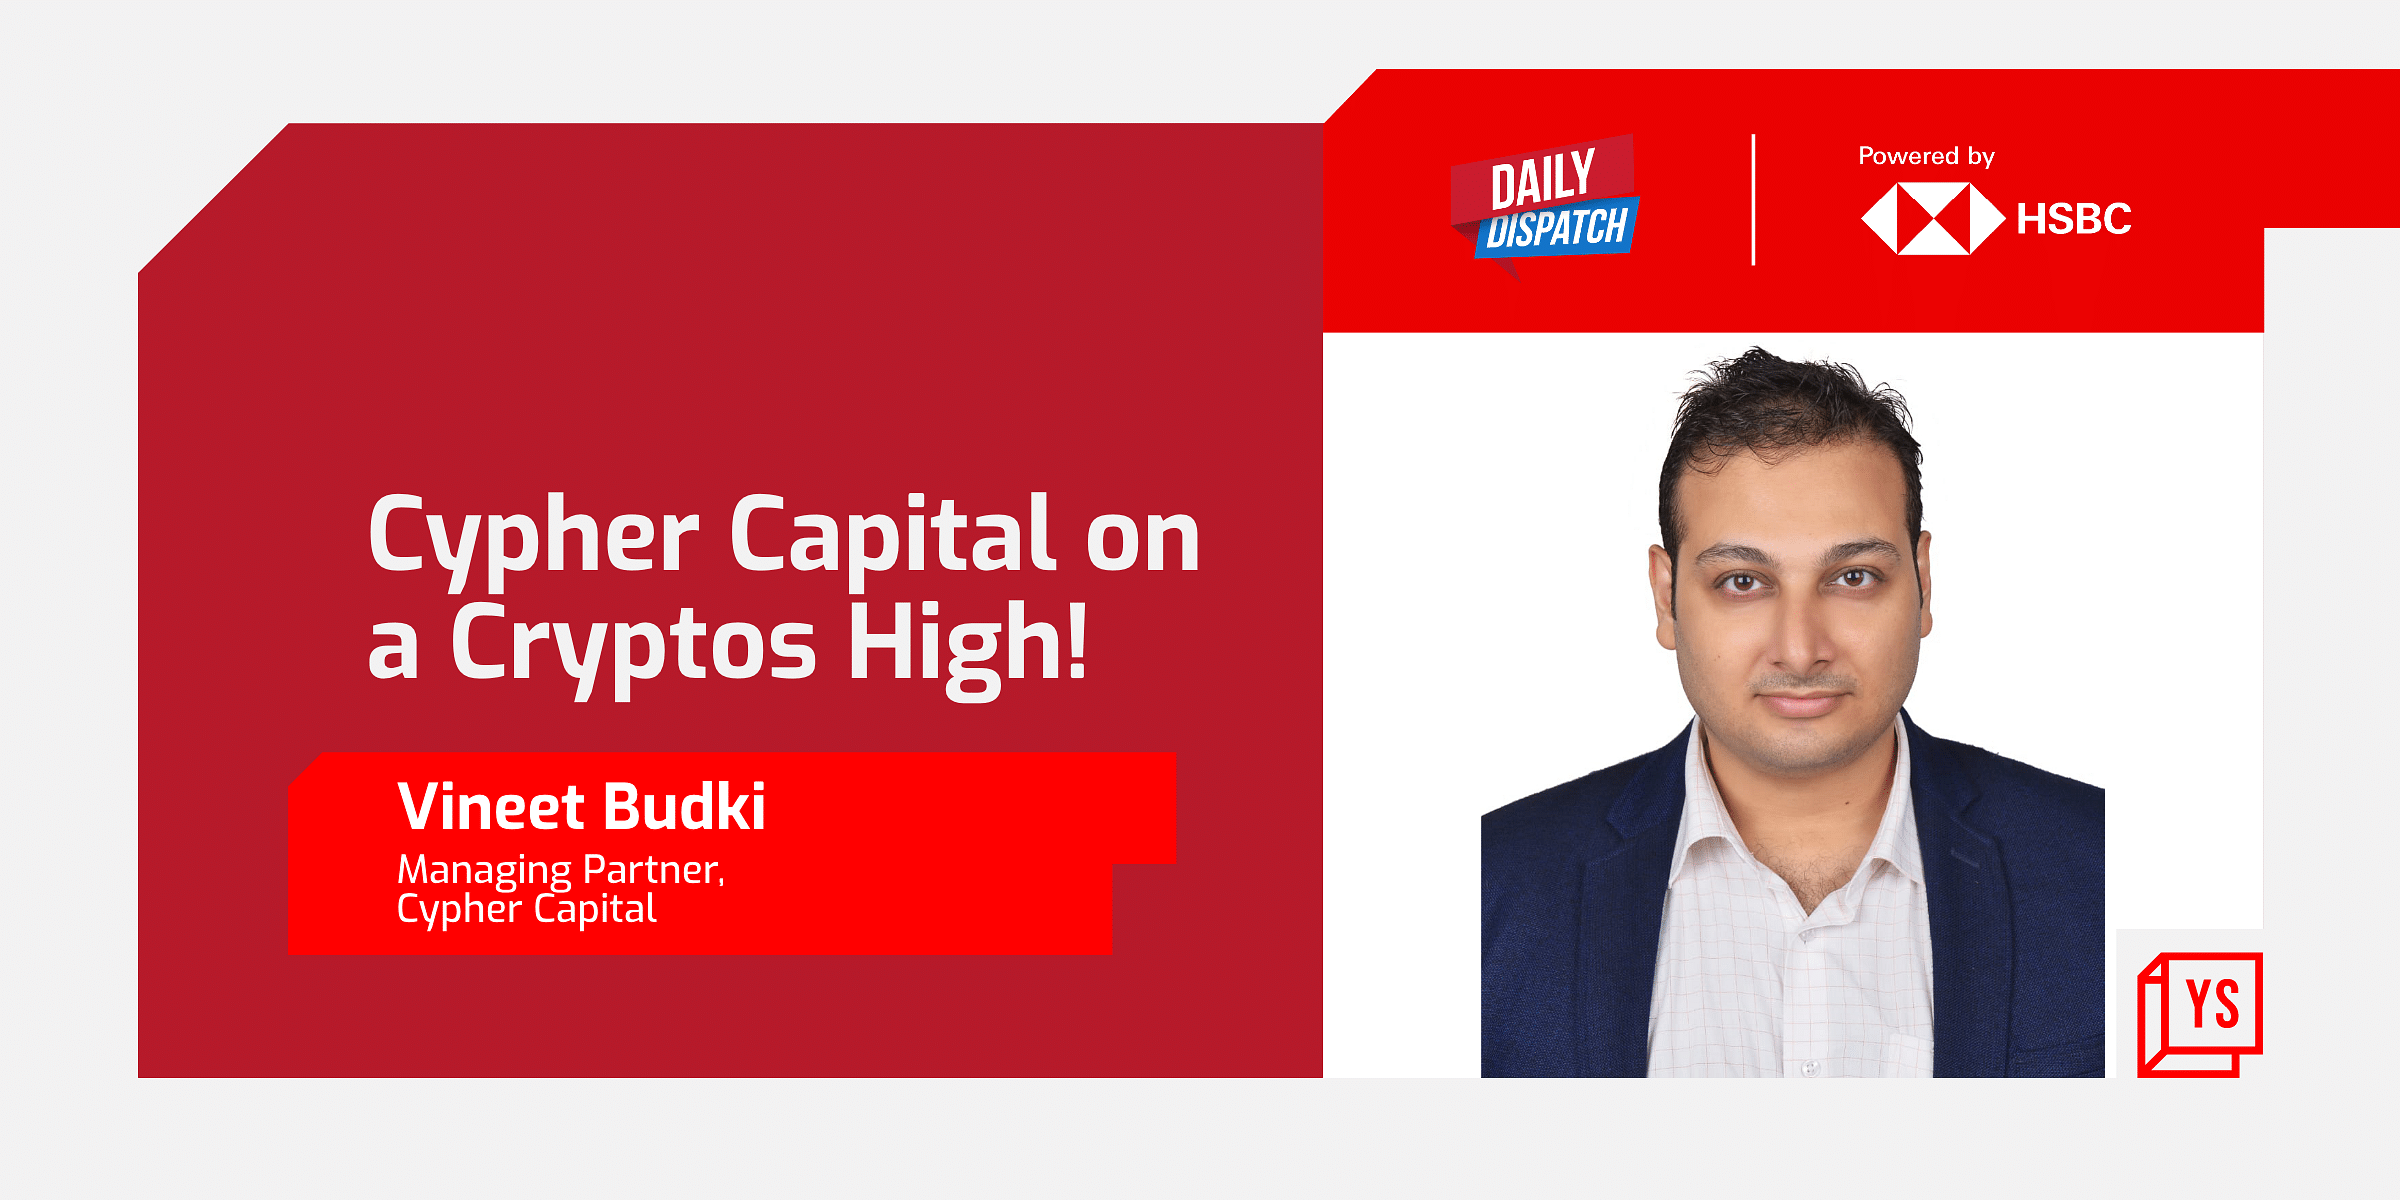 You are currently viewing Dubai-based VC firm Cypher Capital bids high on India’s emerging crypto space